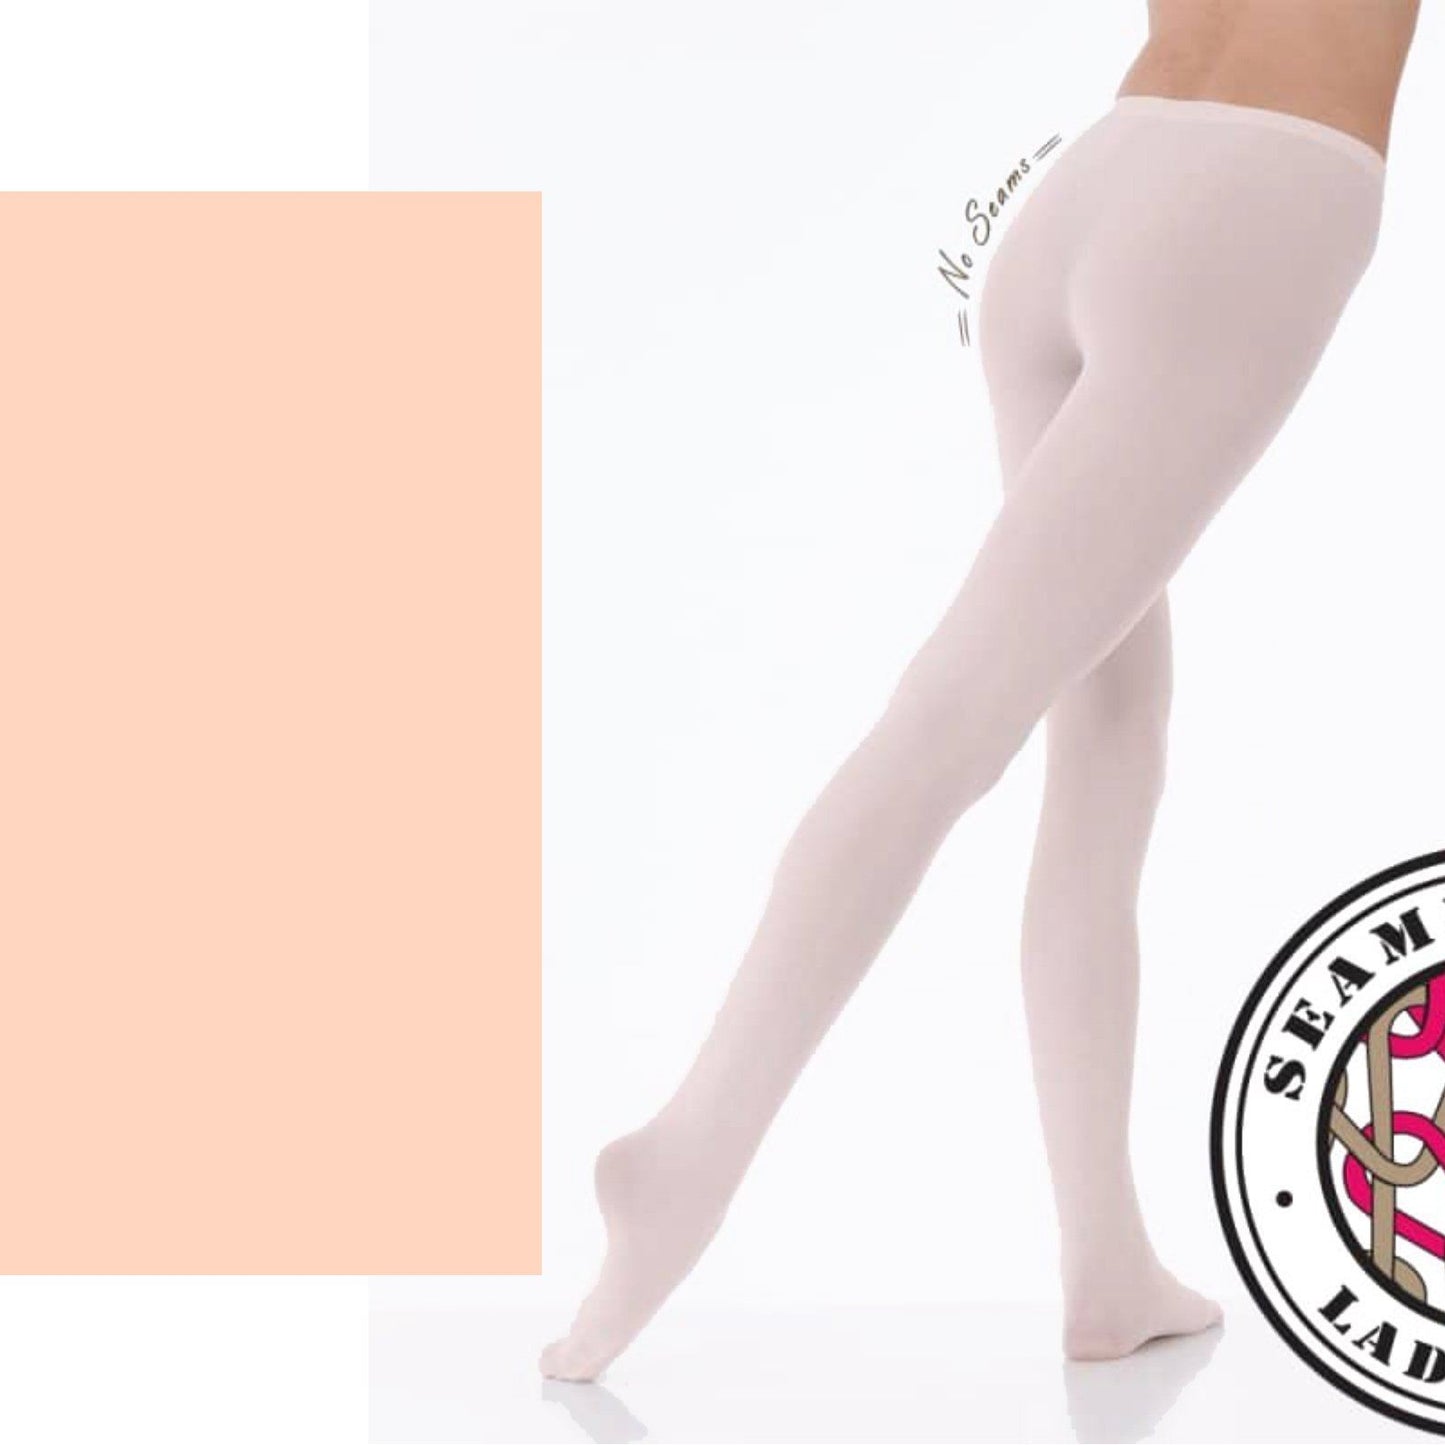 'SILKY' BRAND 80 DENIER THEATRICAL PINK ULTIMATE SEAMLESS FOOTED BALLET DANCE TIGHTS Tights & Socks Silky 